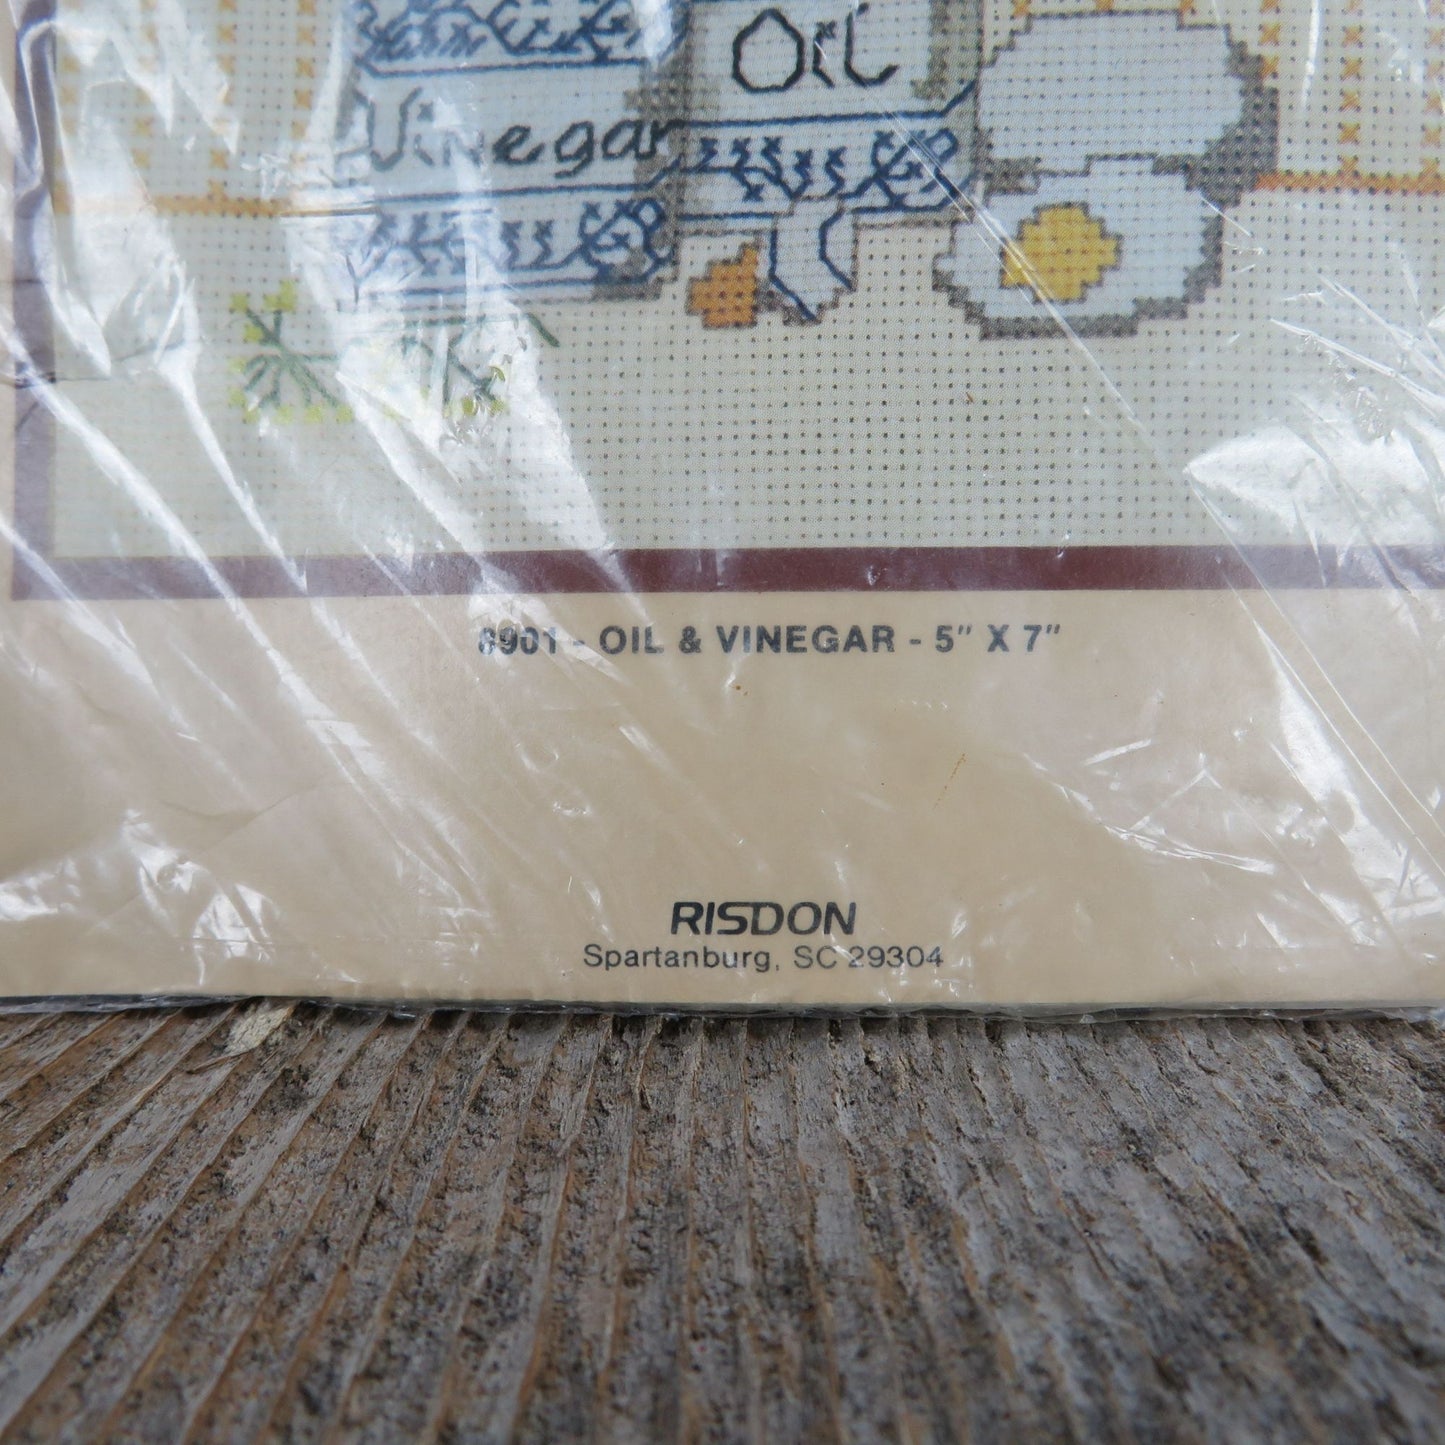 Vintage Counted Cross Stitch Kit Oil and Vinegar Kitchen Art Dritz 1983 House Warming 8901